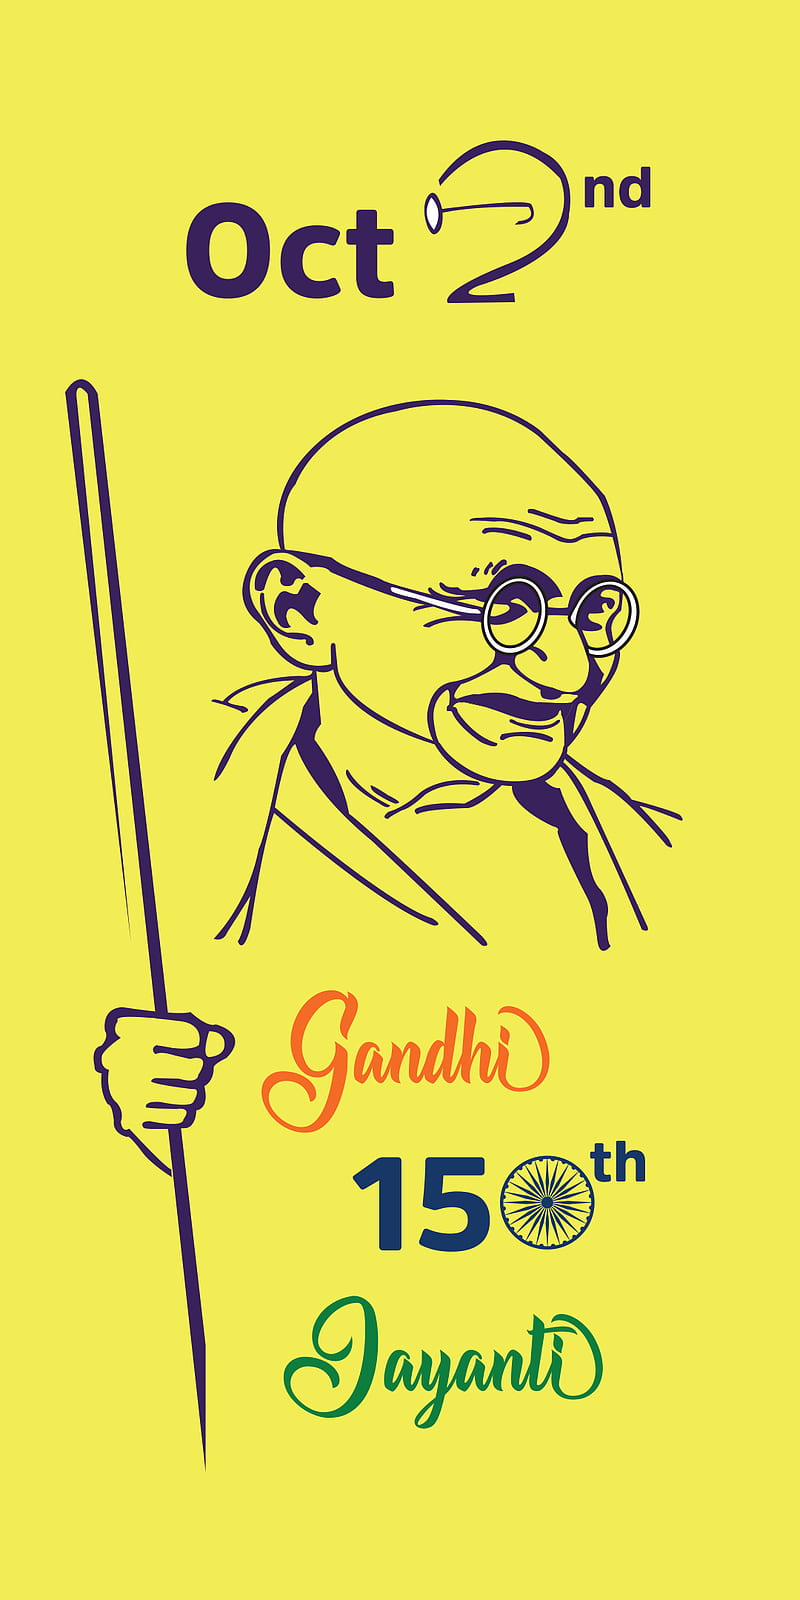 Gandhi Jayanti 2020 Wishes in Hindi & HD Images: WhatsApp Stickers, GIF  Greetings, Quotes, SMS and Facebook Messages to Share on Bapu's 151st Birth  Anniversary